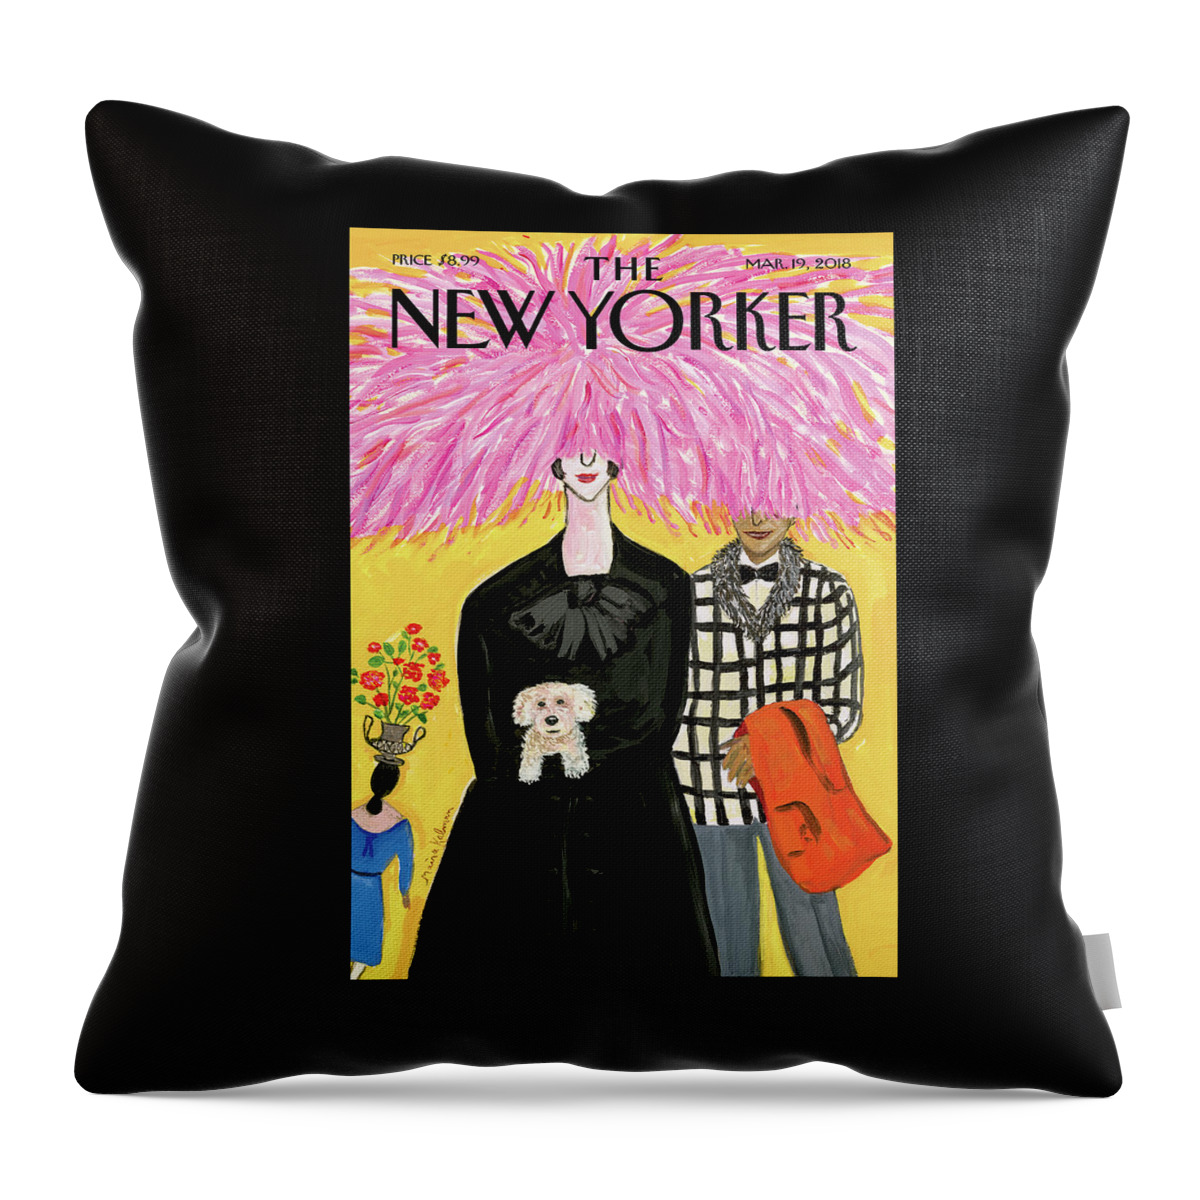 In Full Bloom Throw Pillow